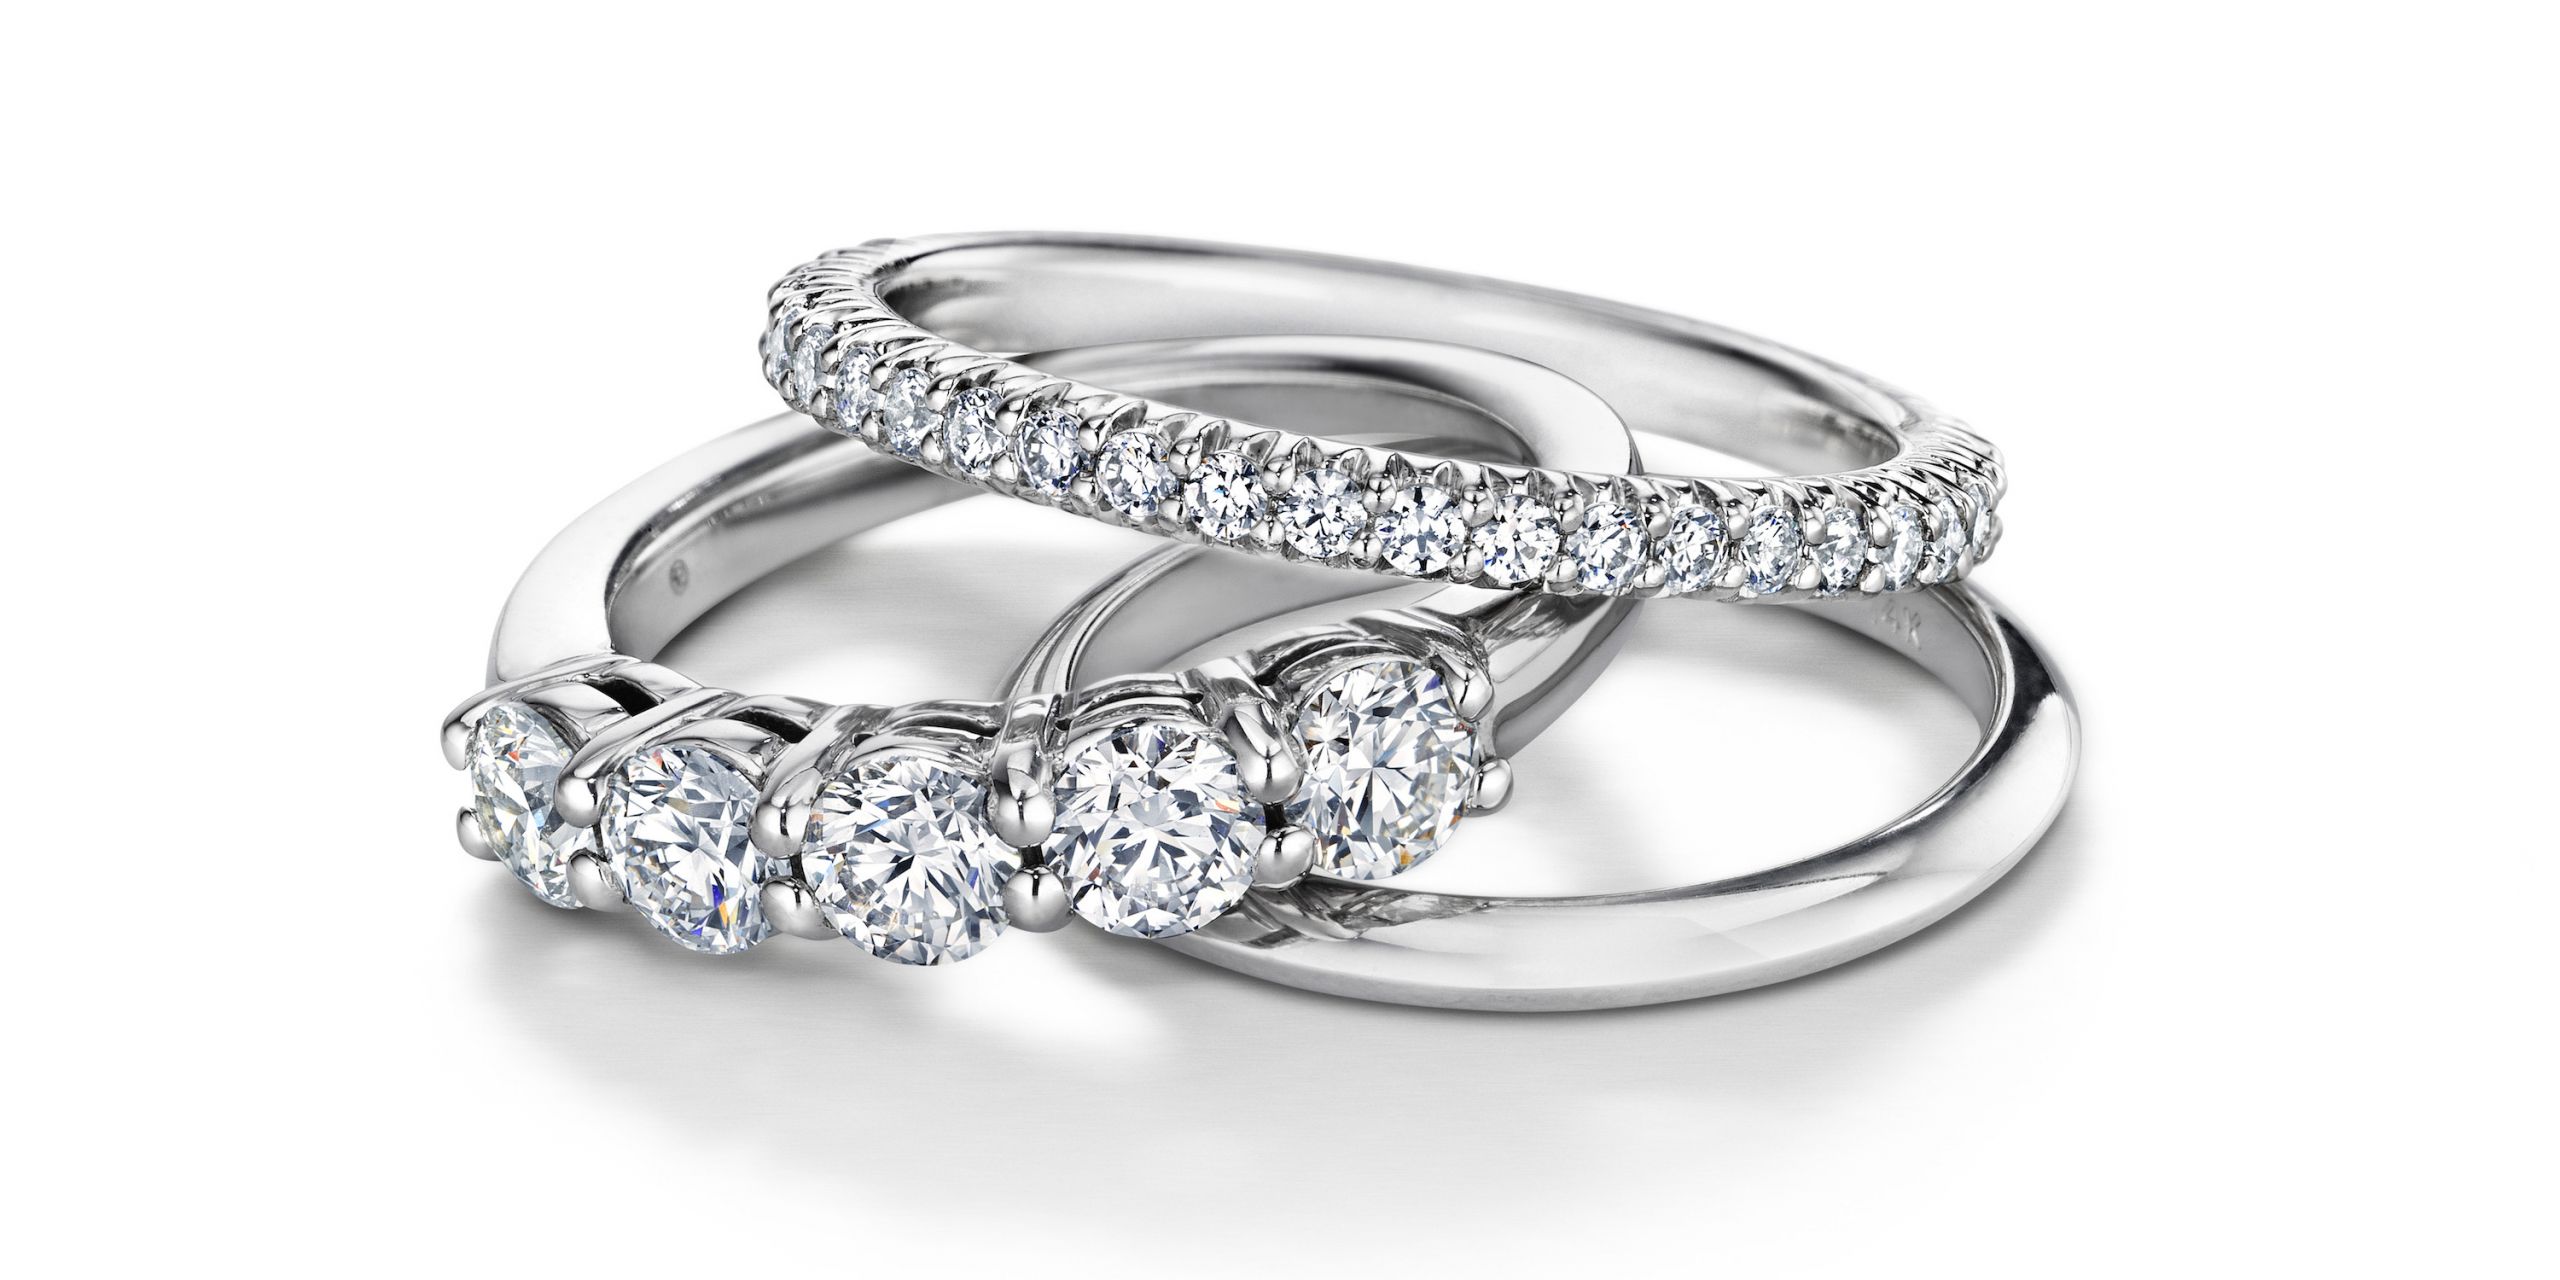 The Wedding Ring
 The Top 10 Most Popular Wedding Rings of 2015